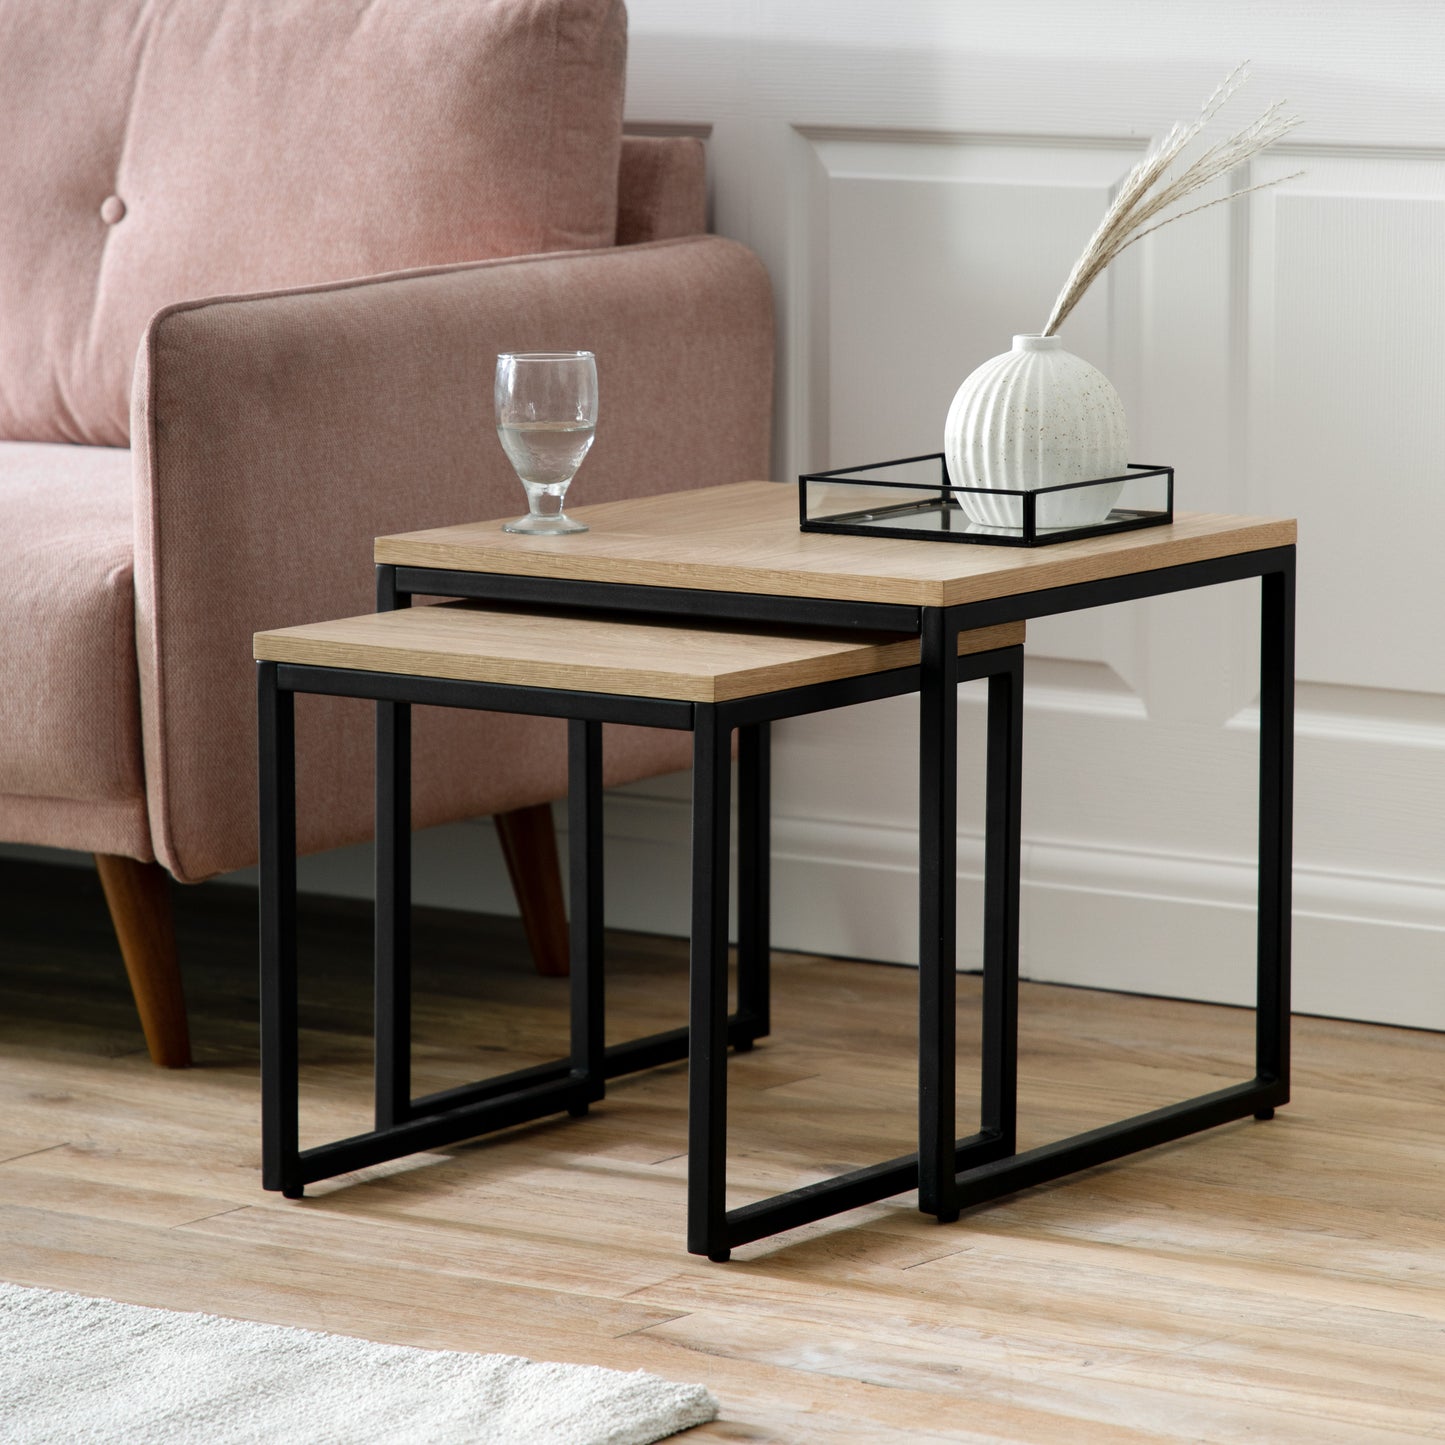 Two Staverton home furniture side tables from Kikiathome.co.uk in a room with a pink couch.